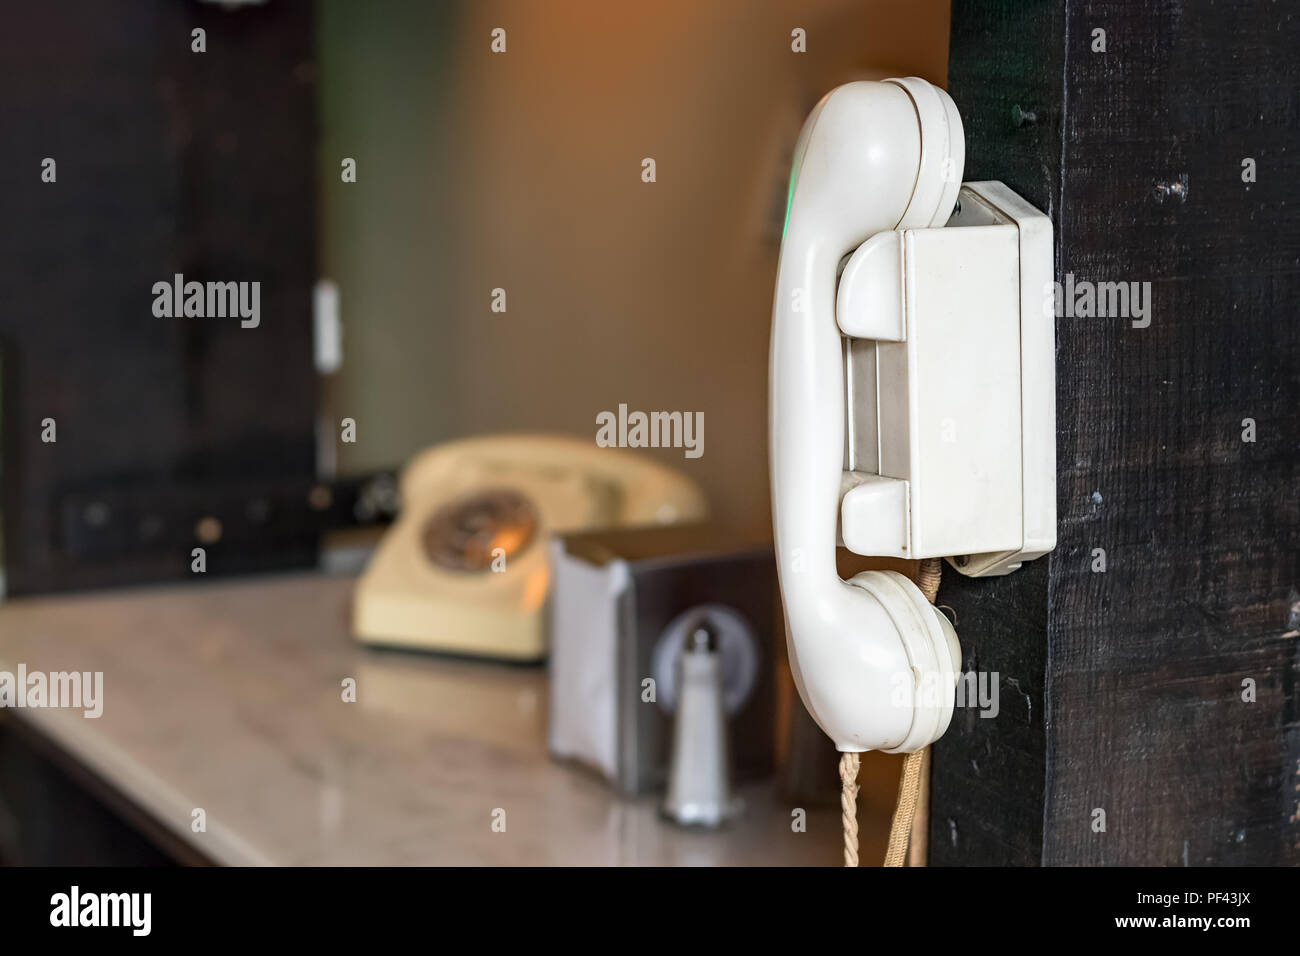 A vintage wall mounted intercom made with white plastic with a vintage telephone as a blurred background. Stock Photo